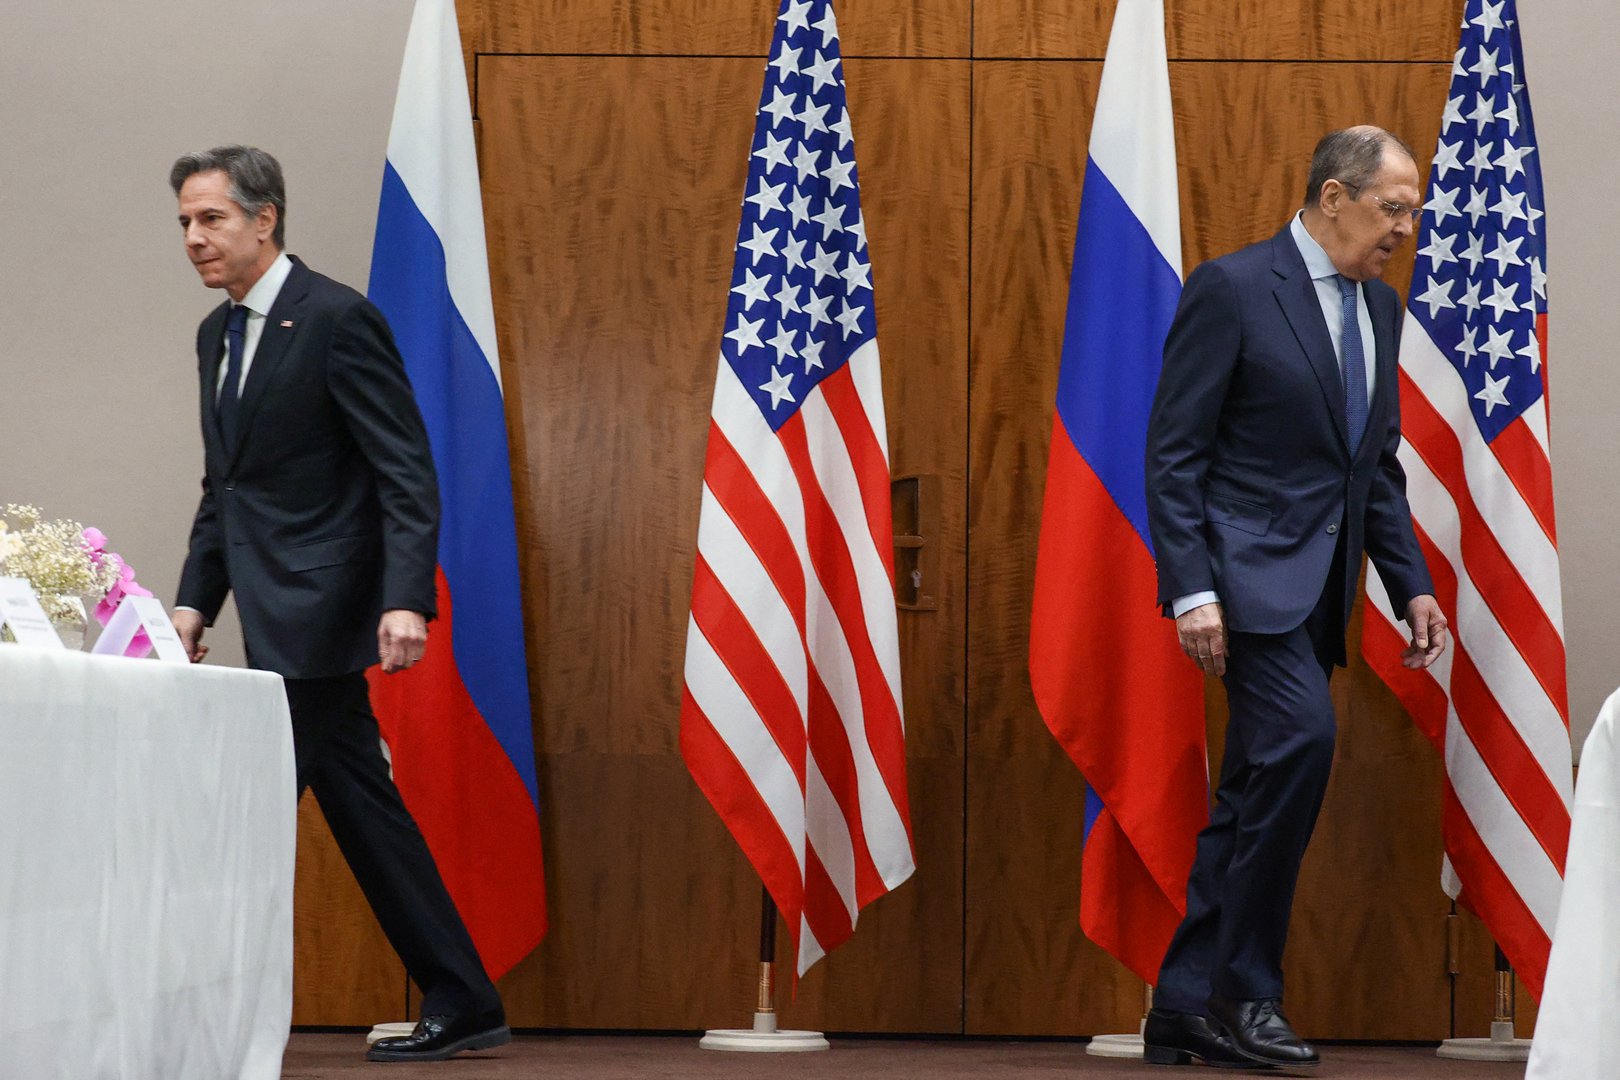 image U.S. and Russia agree to keep talking after meeting on Ukraine